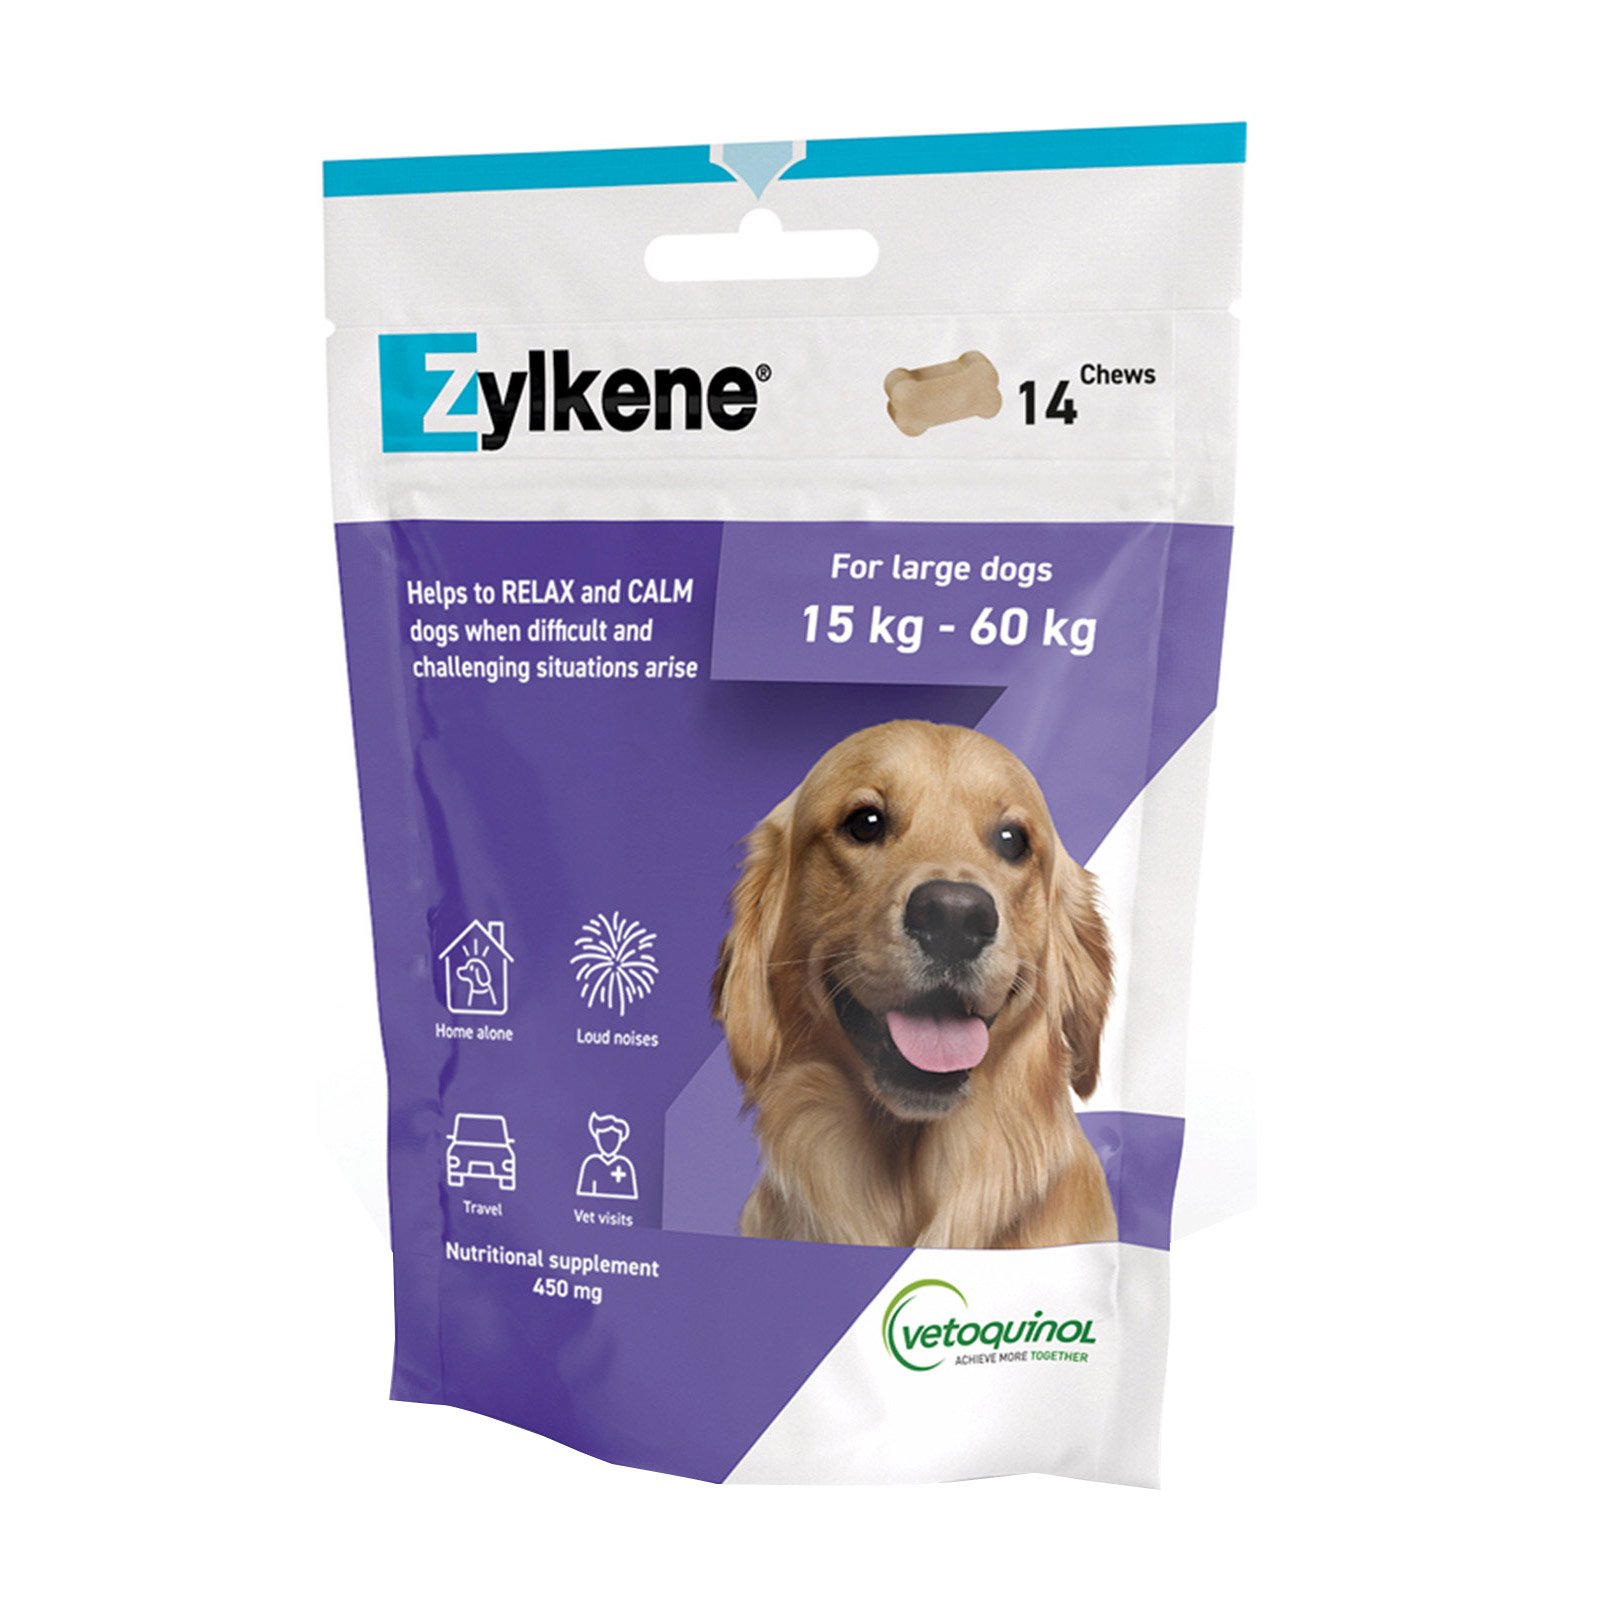 Zylkene Nutritional Supplement Calming Chews For Large Dogs 15-60kg 450mg